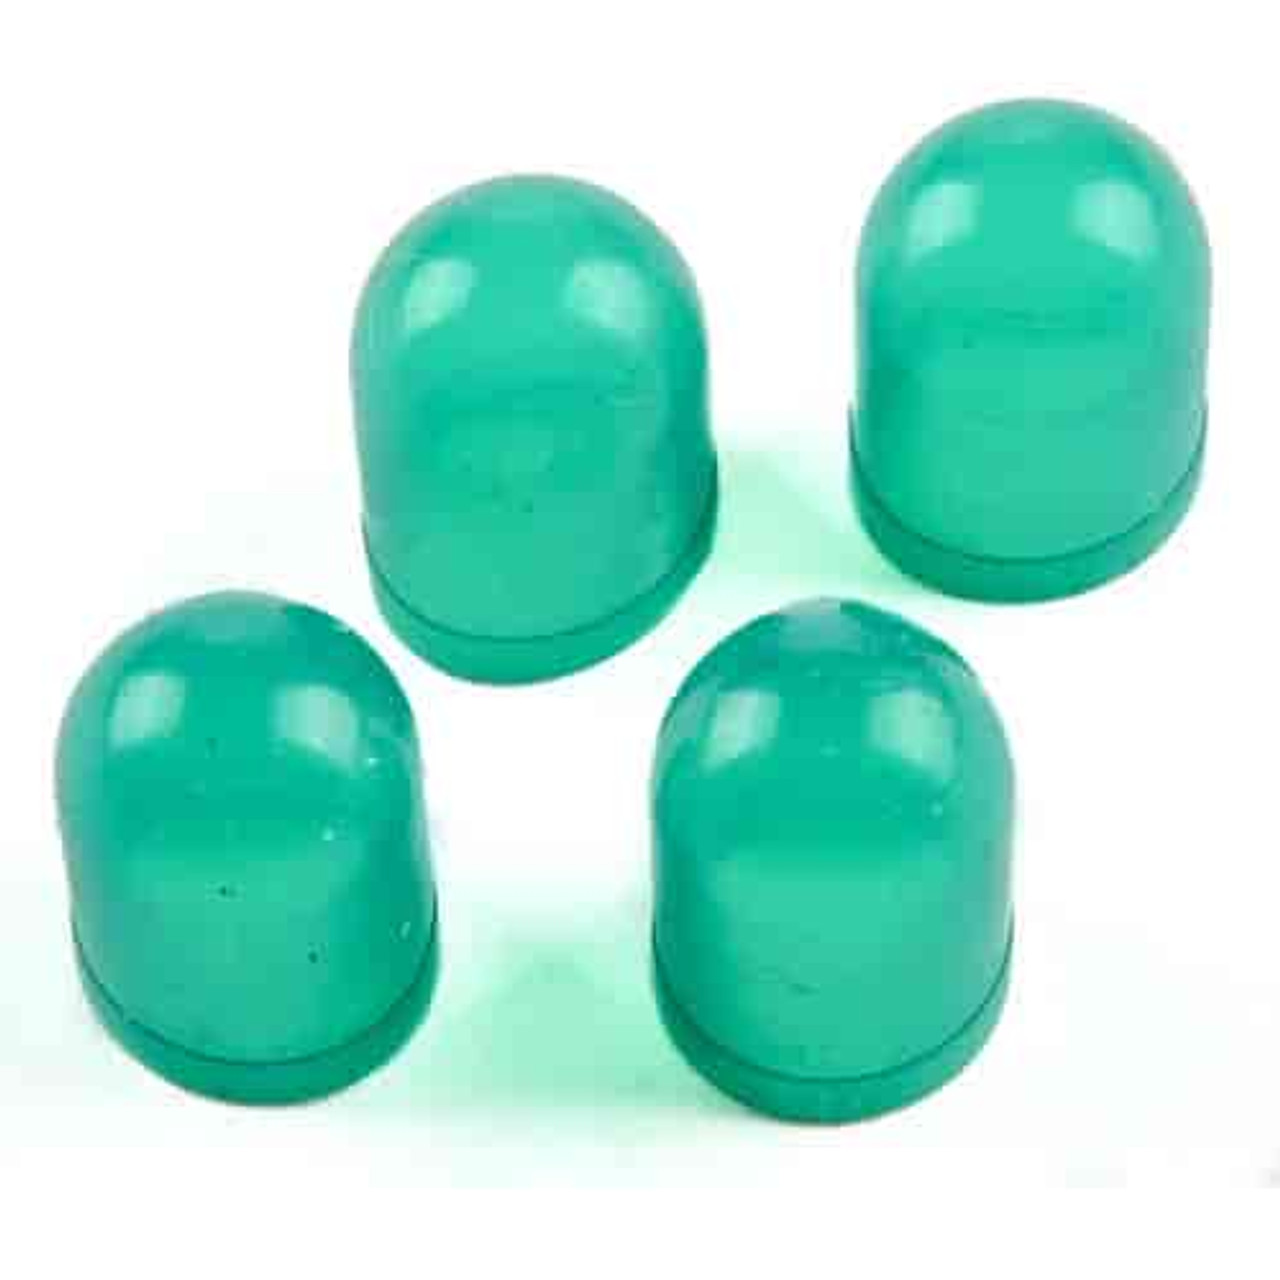 VDO 600-862 Green Light Diffusers For Type C and E Wedge Bulbs. 4-Pack